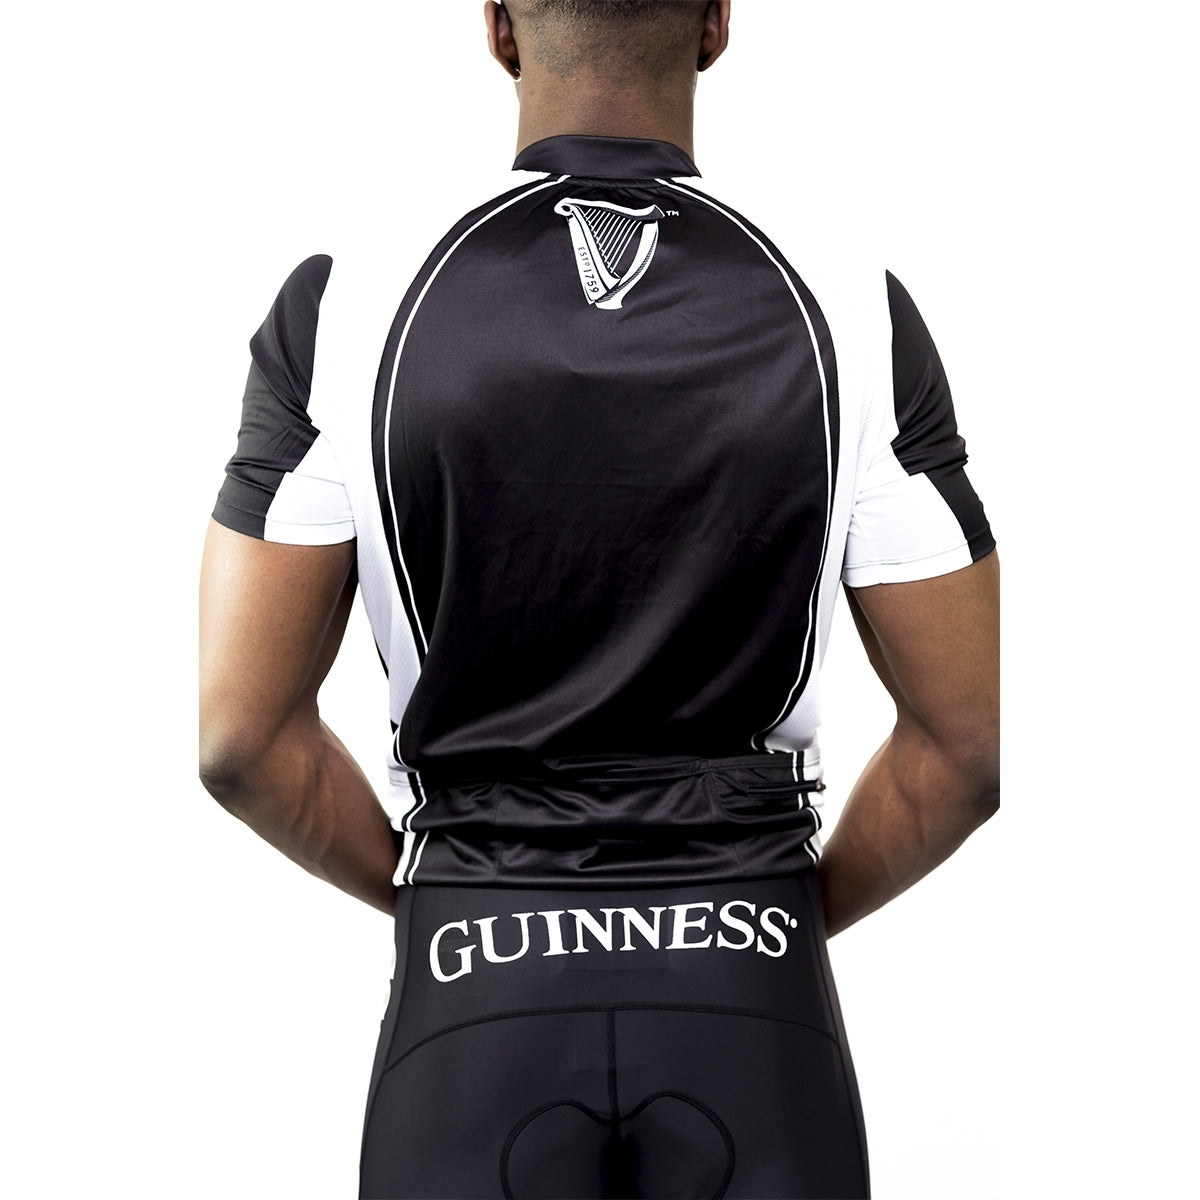 The back of a man wearing a Guinness UK Performance Cycling Jersey made of polyester.